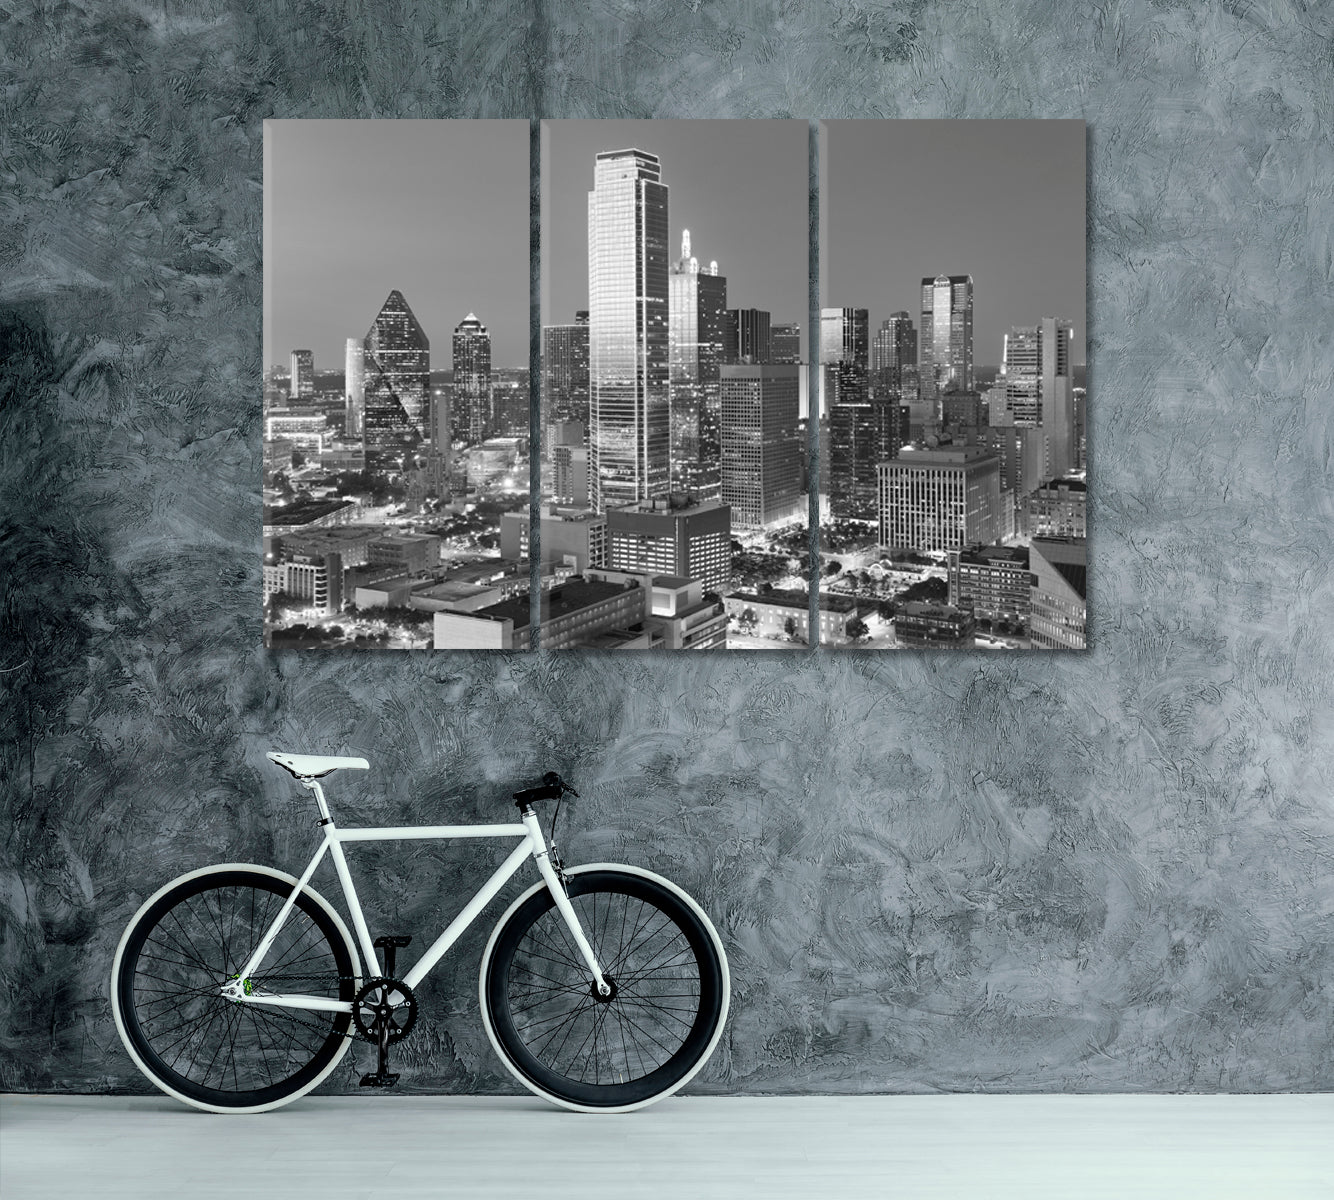 Dallas City Skyline in Black and White Canvas Print ArtLexy 3 Panels 36"x24" inches 